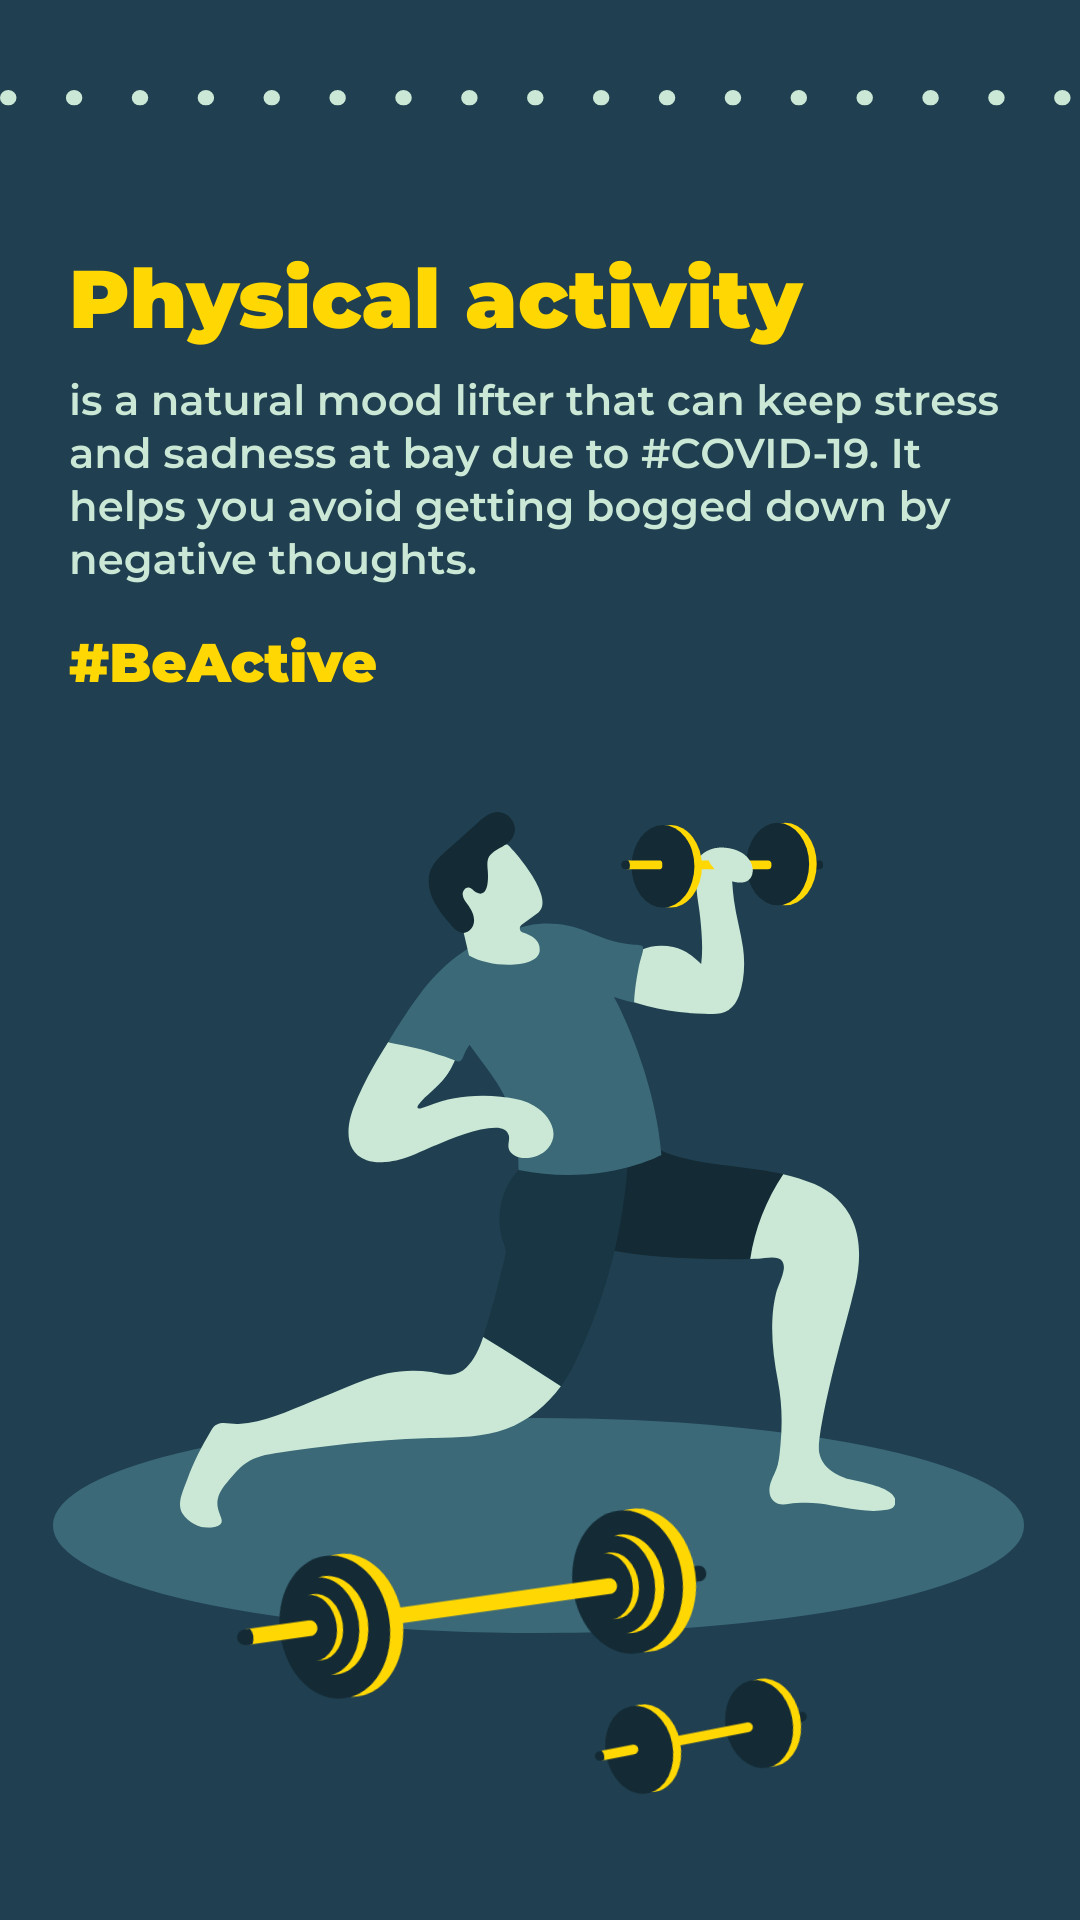 Covid-19 Negative Thoughts Be Active